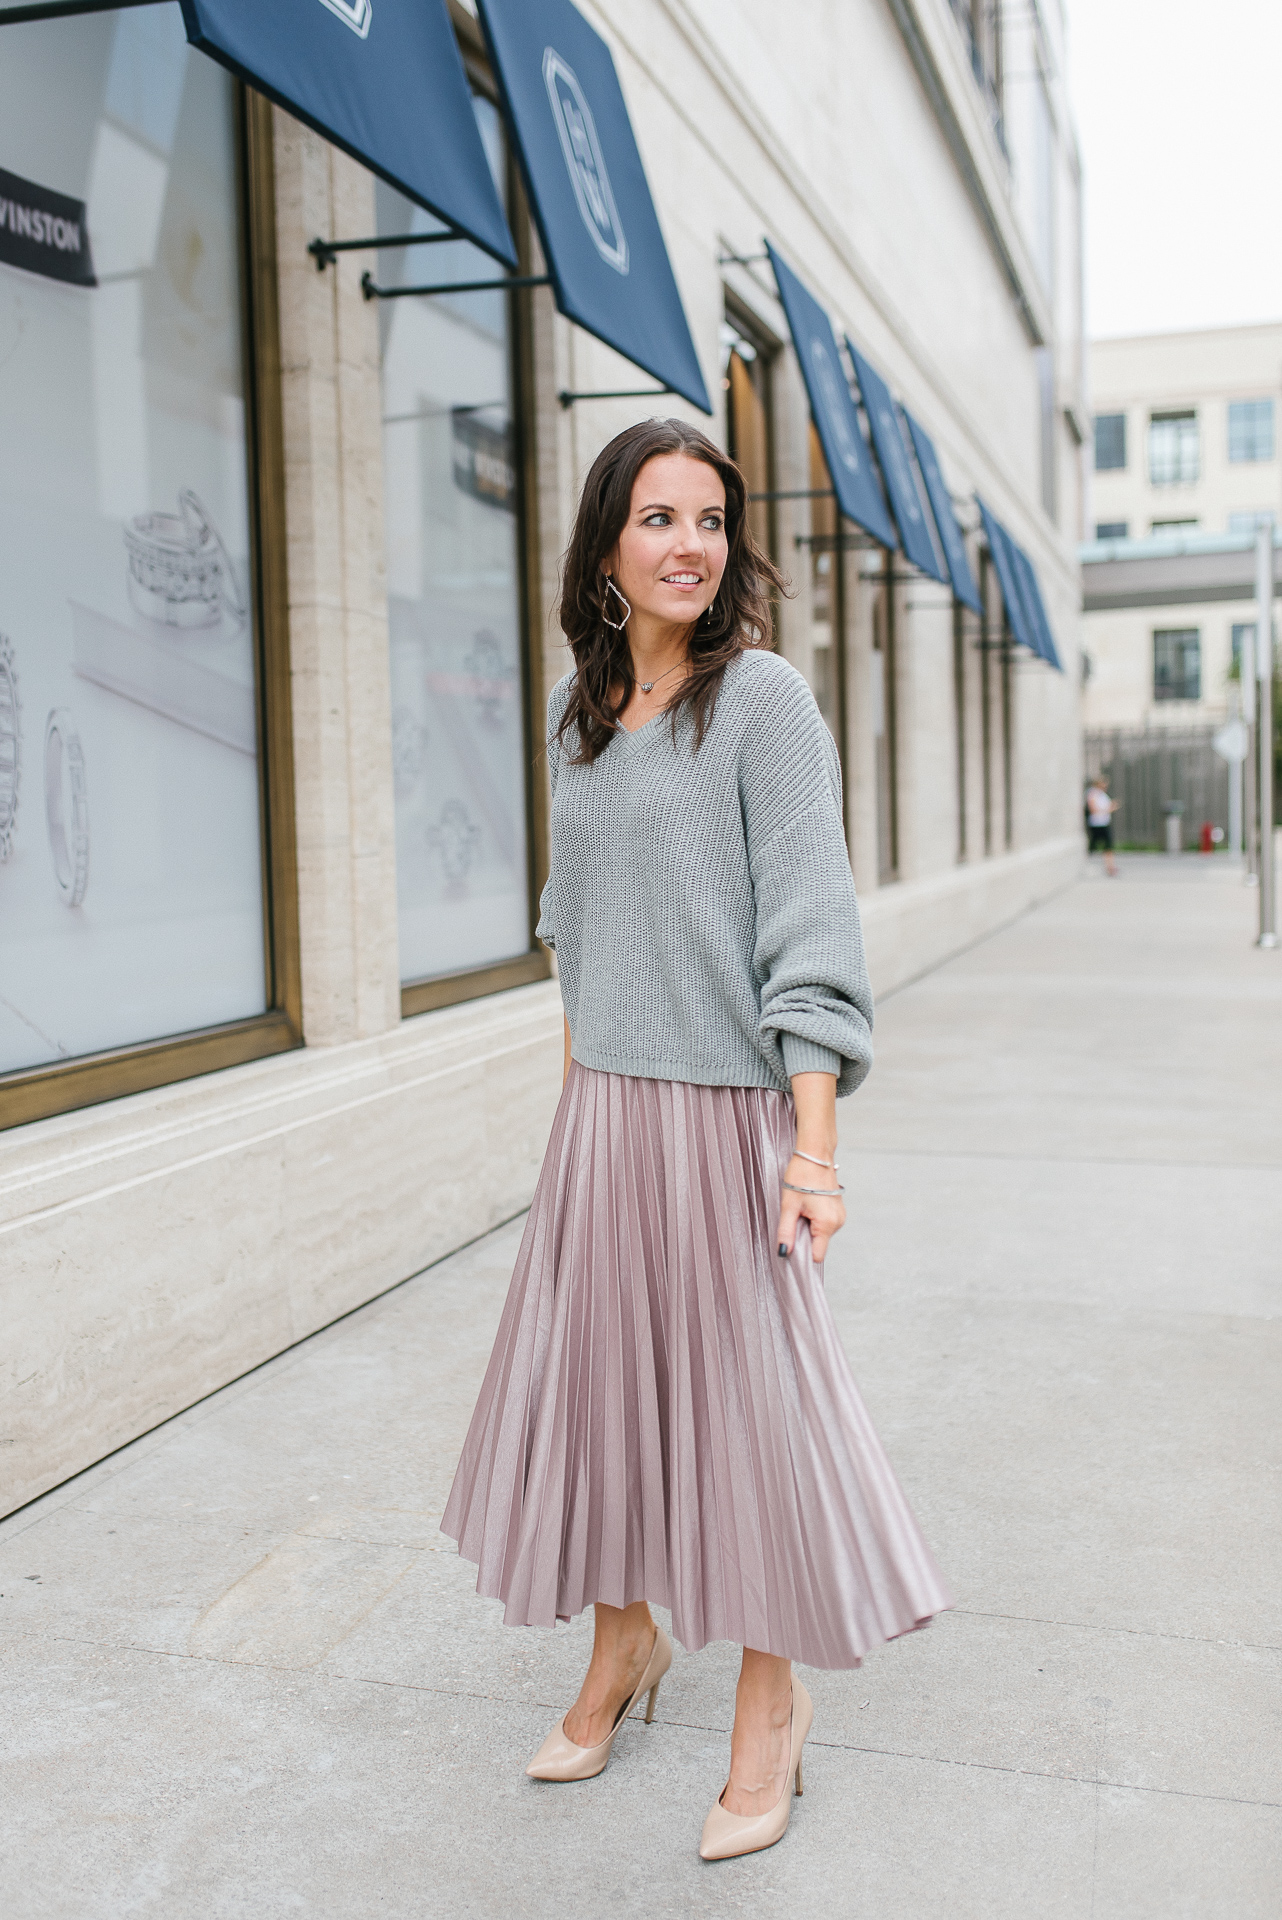 Sweater and Midi Skirt Outfit | Lady in Violet | Houston Fashion Blogger  |Lady in Violet